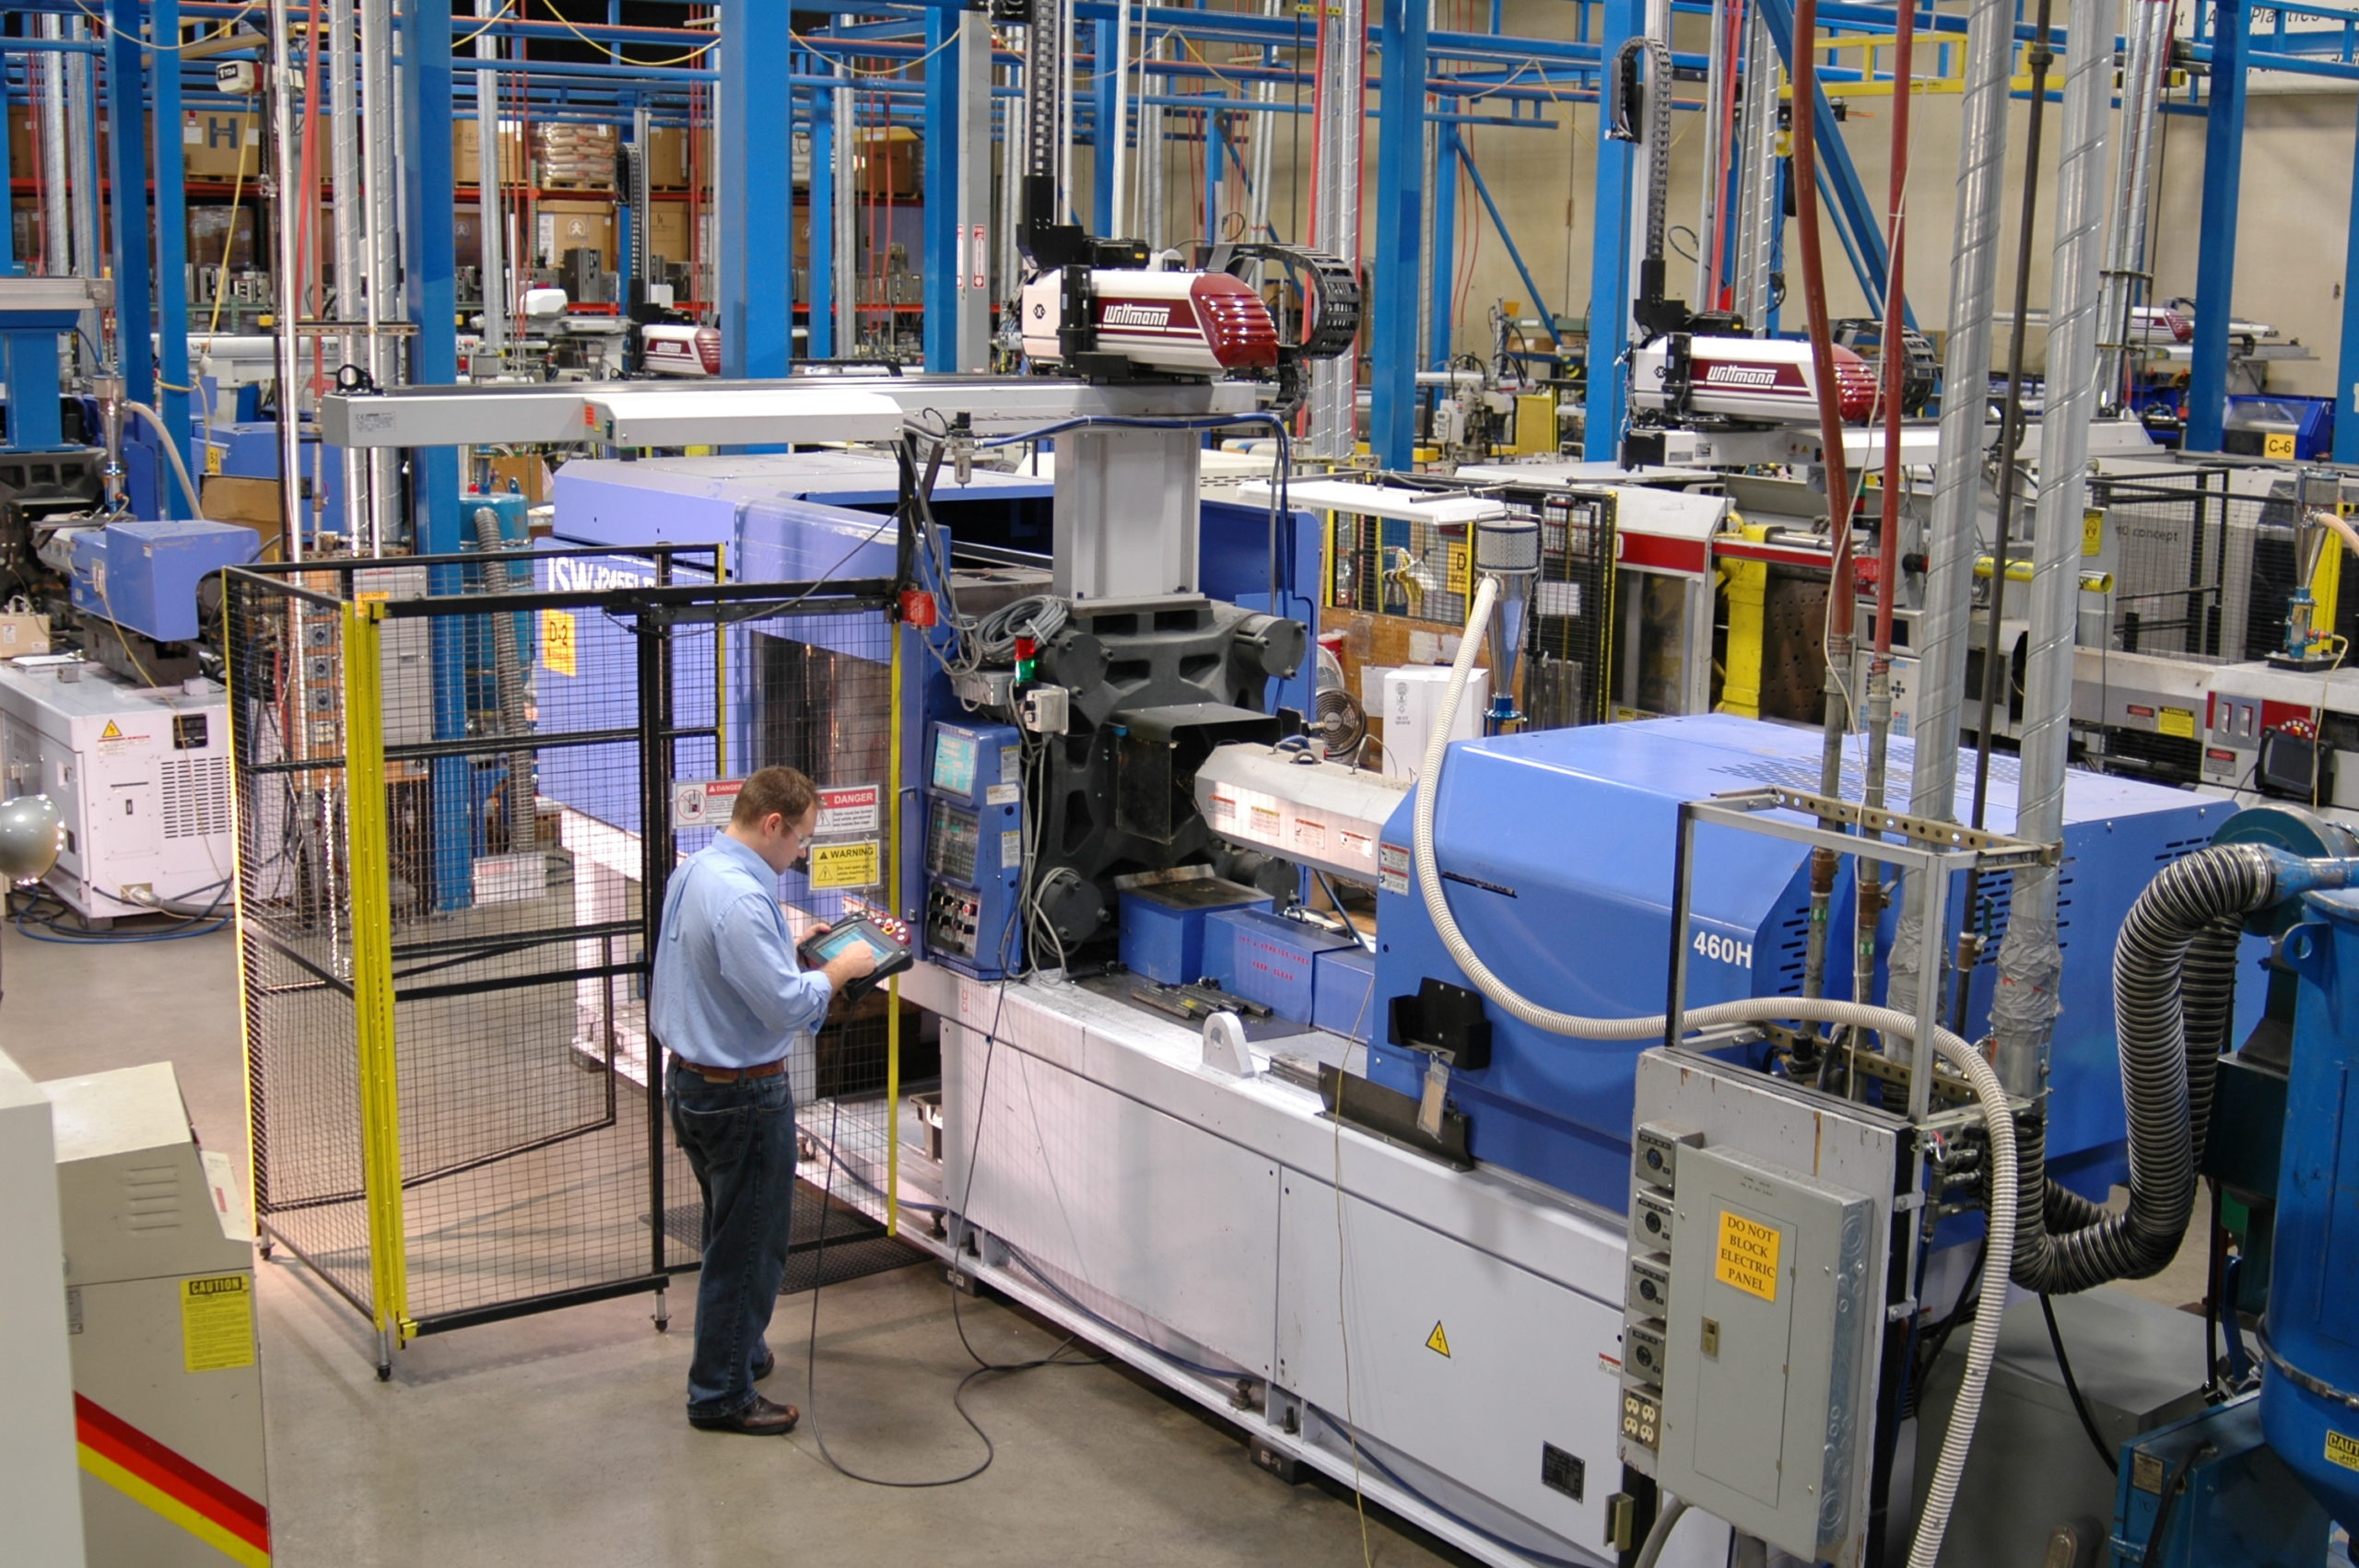 injection molding facility